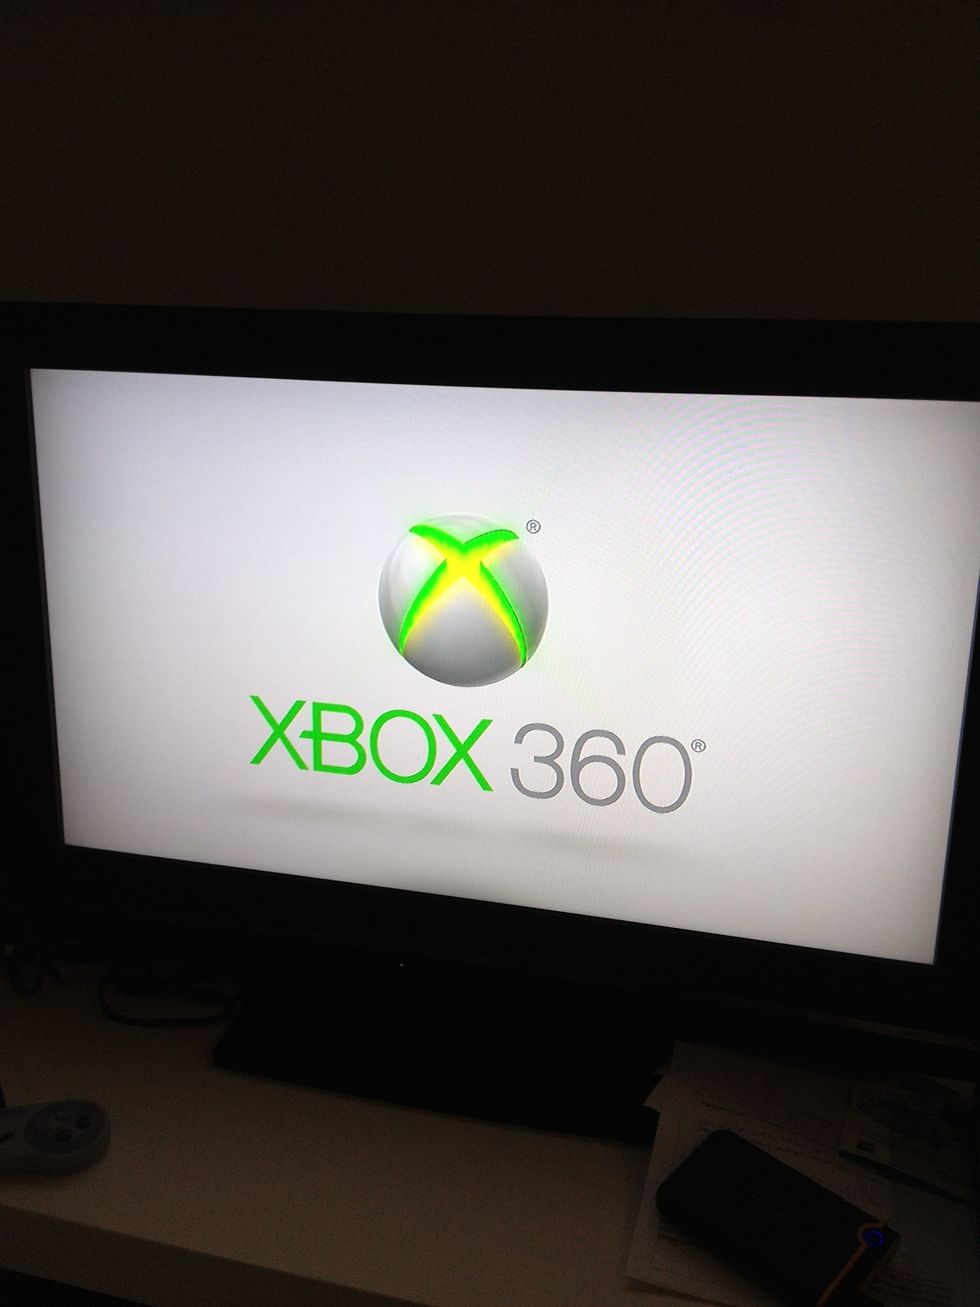 How to turn on your xbox 360 - B+C Guides